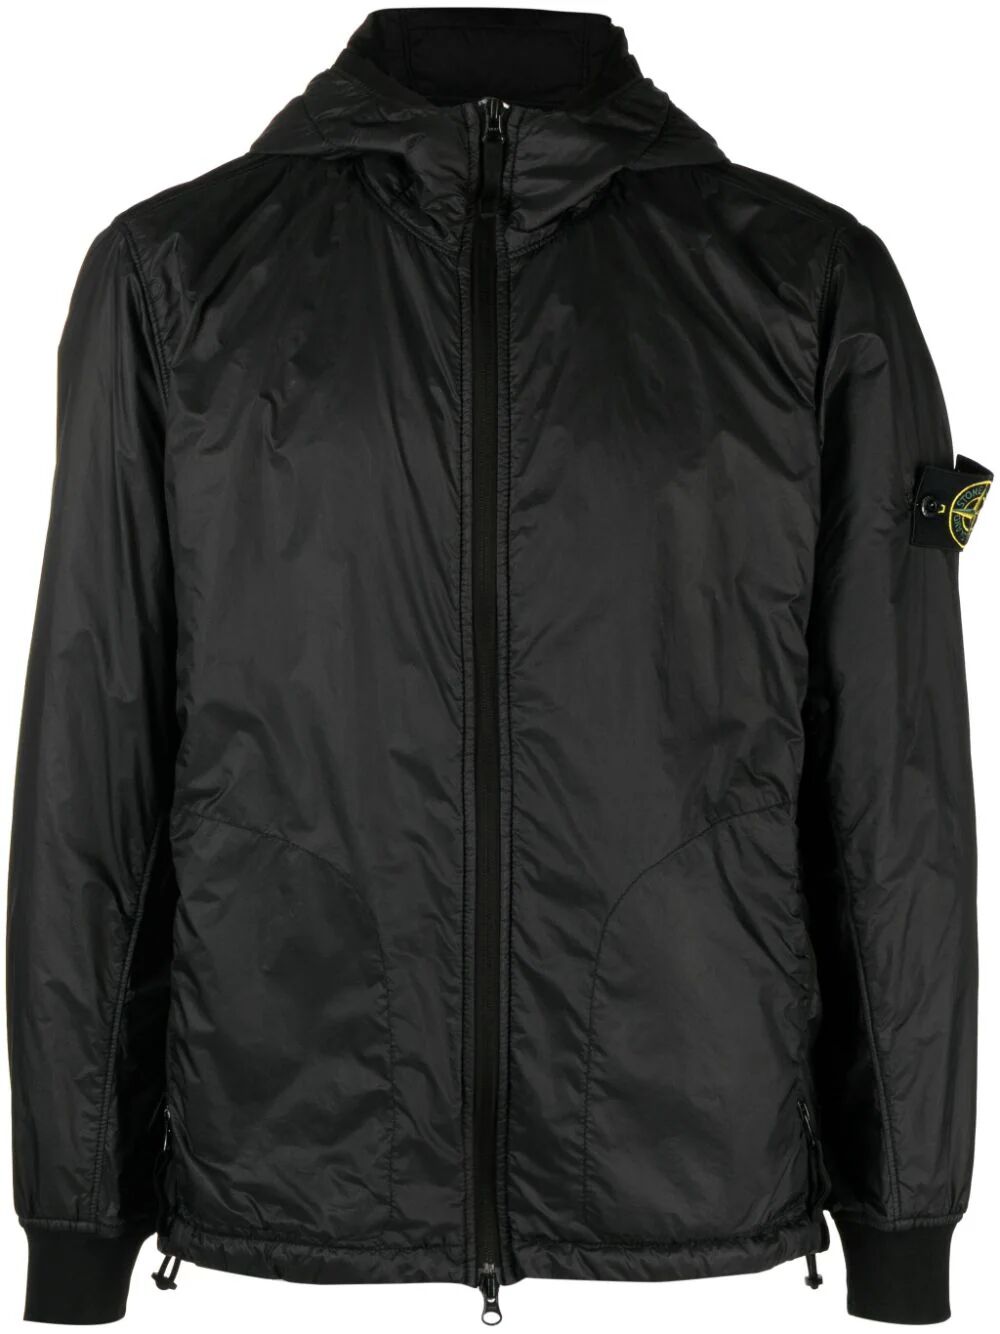 STONE ISLAND-LIGHT OUTERWEAR PACKABLE-7915Q0325 V0029